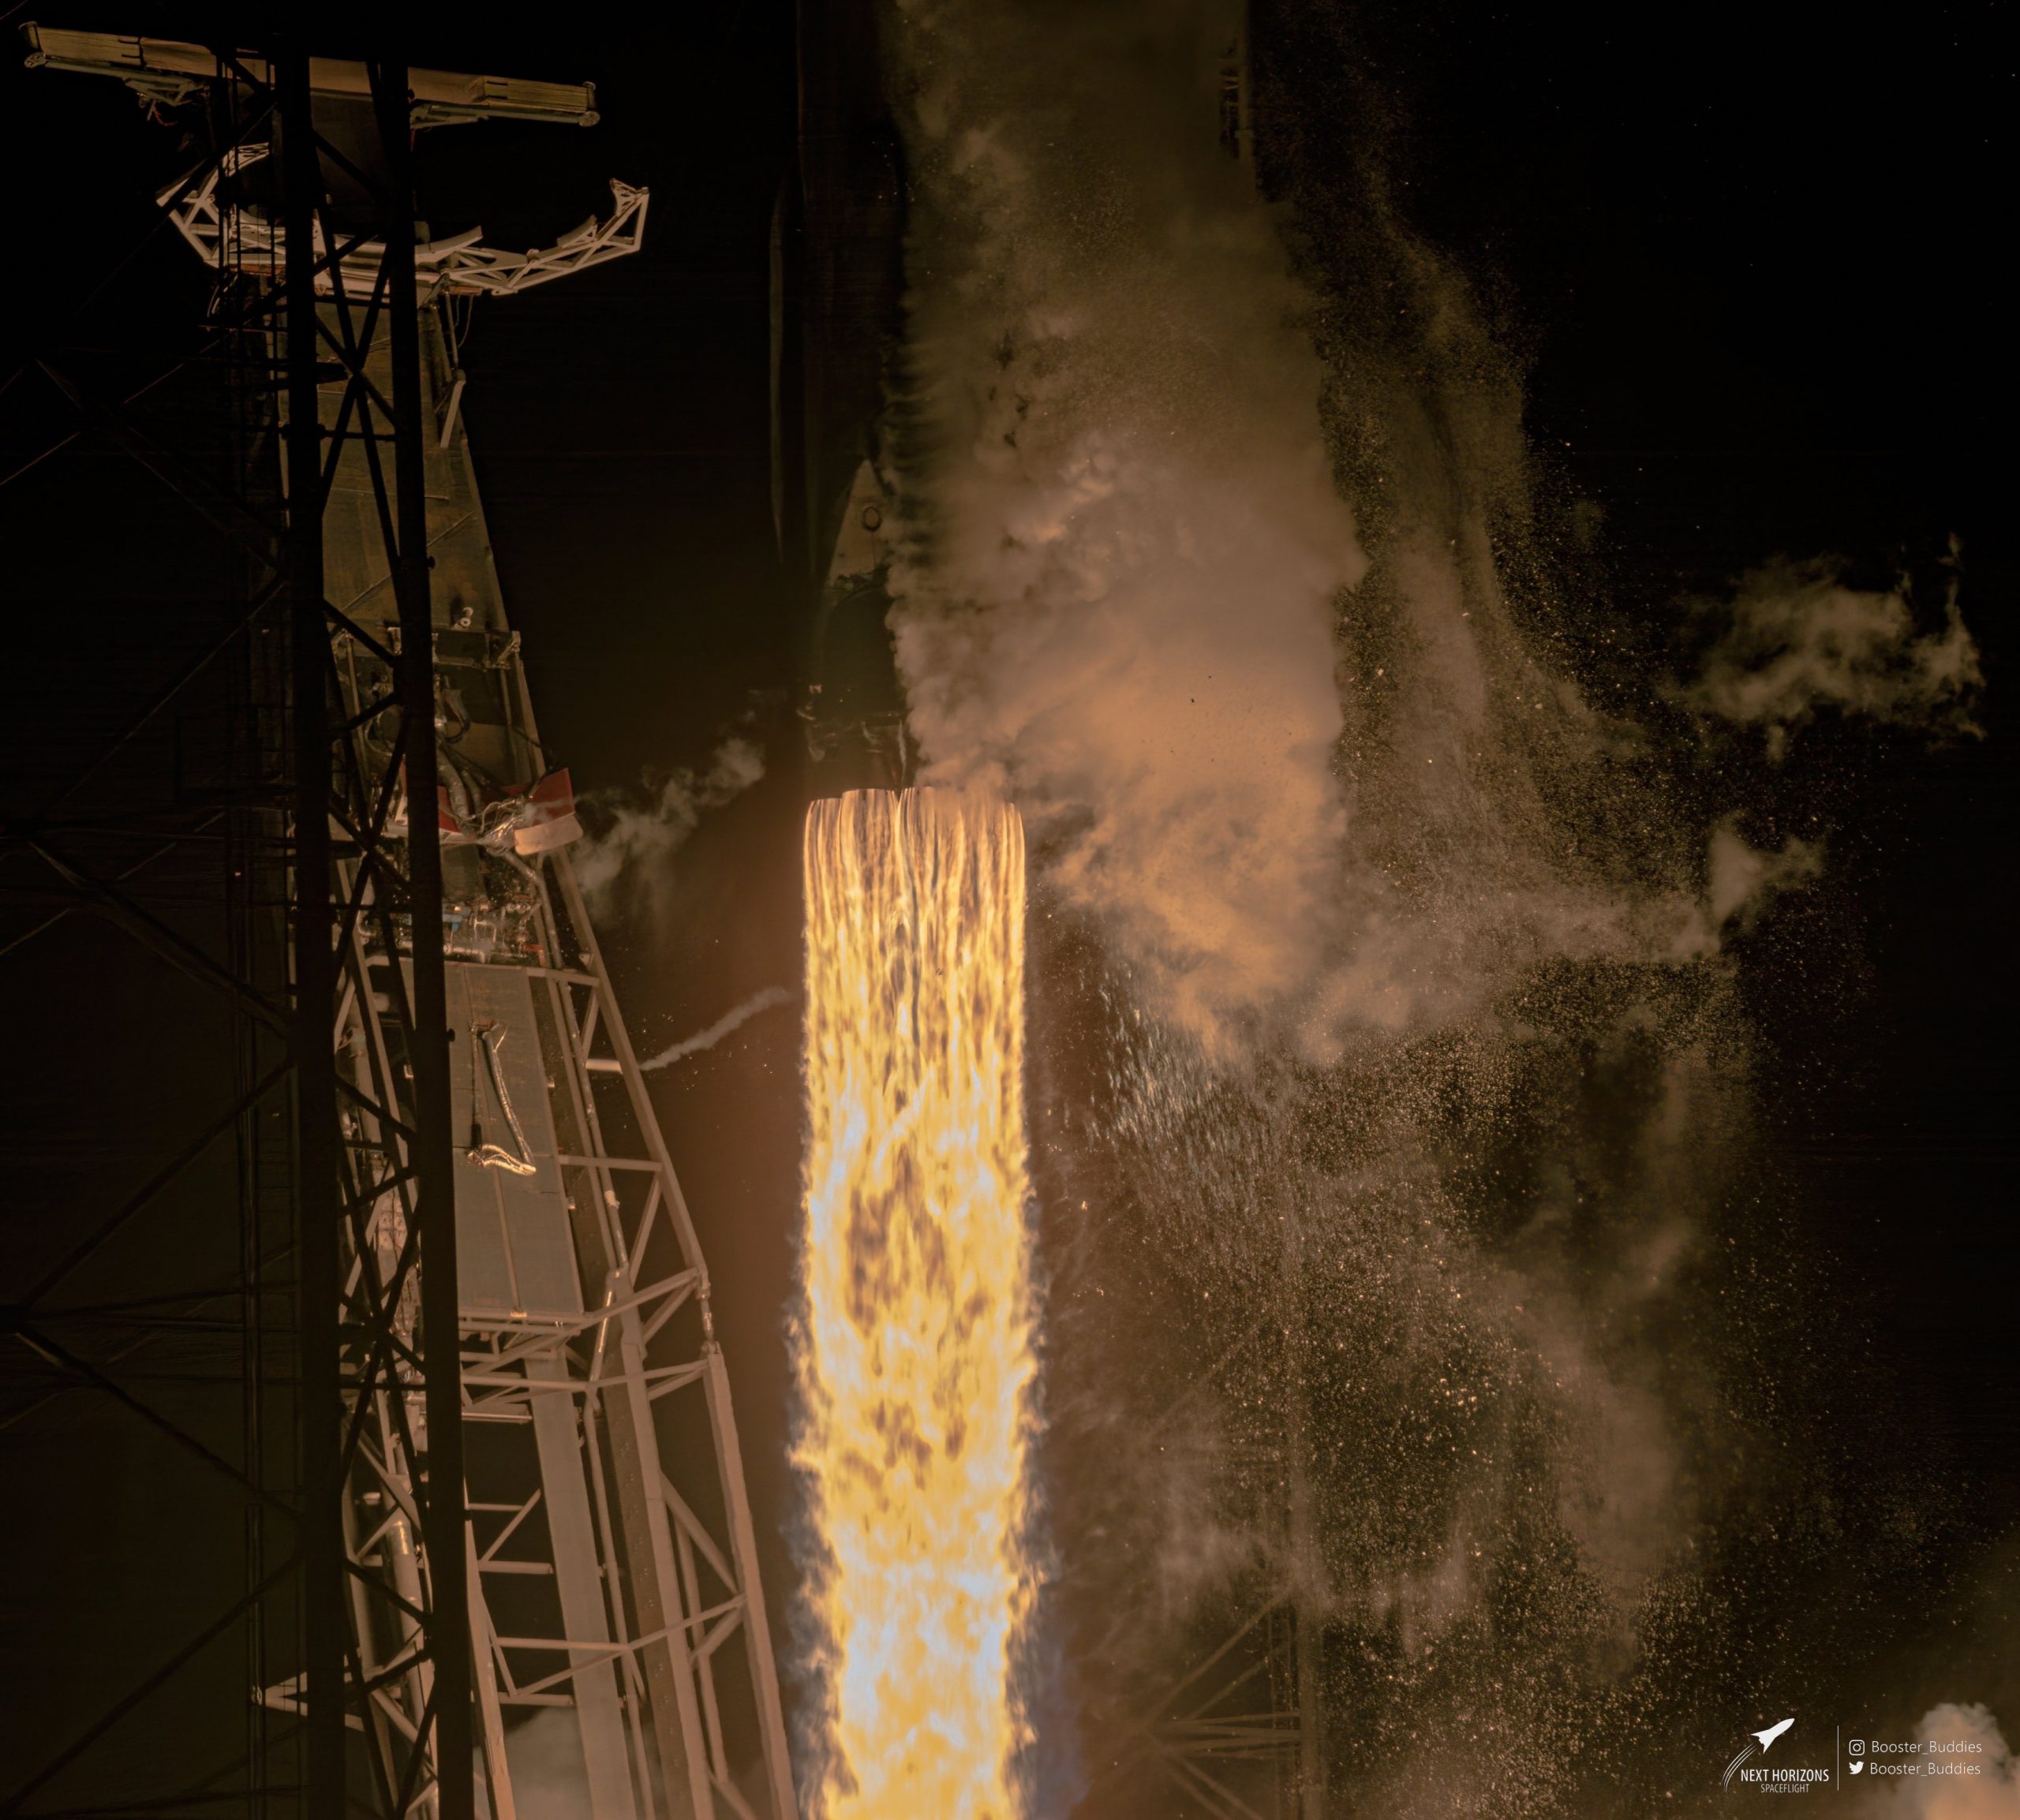 SXM-8 satellite launched atop a SpaceX Falcon 9 rocket